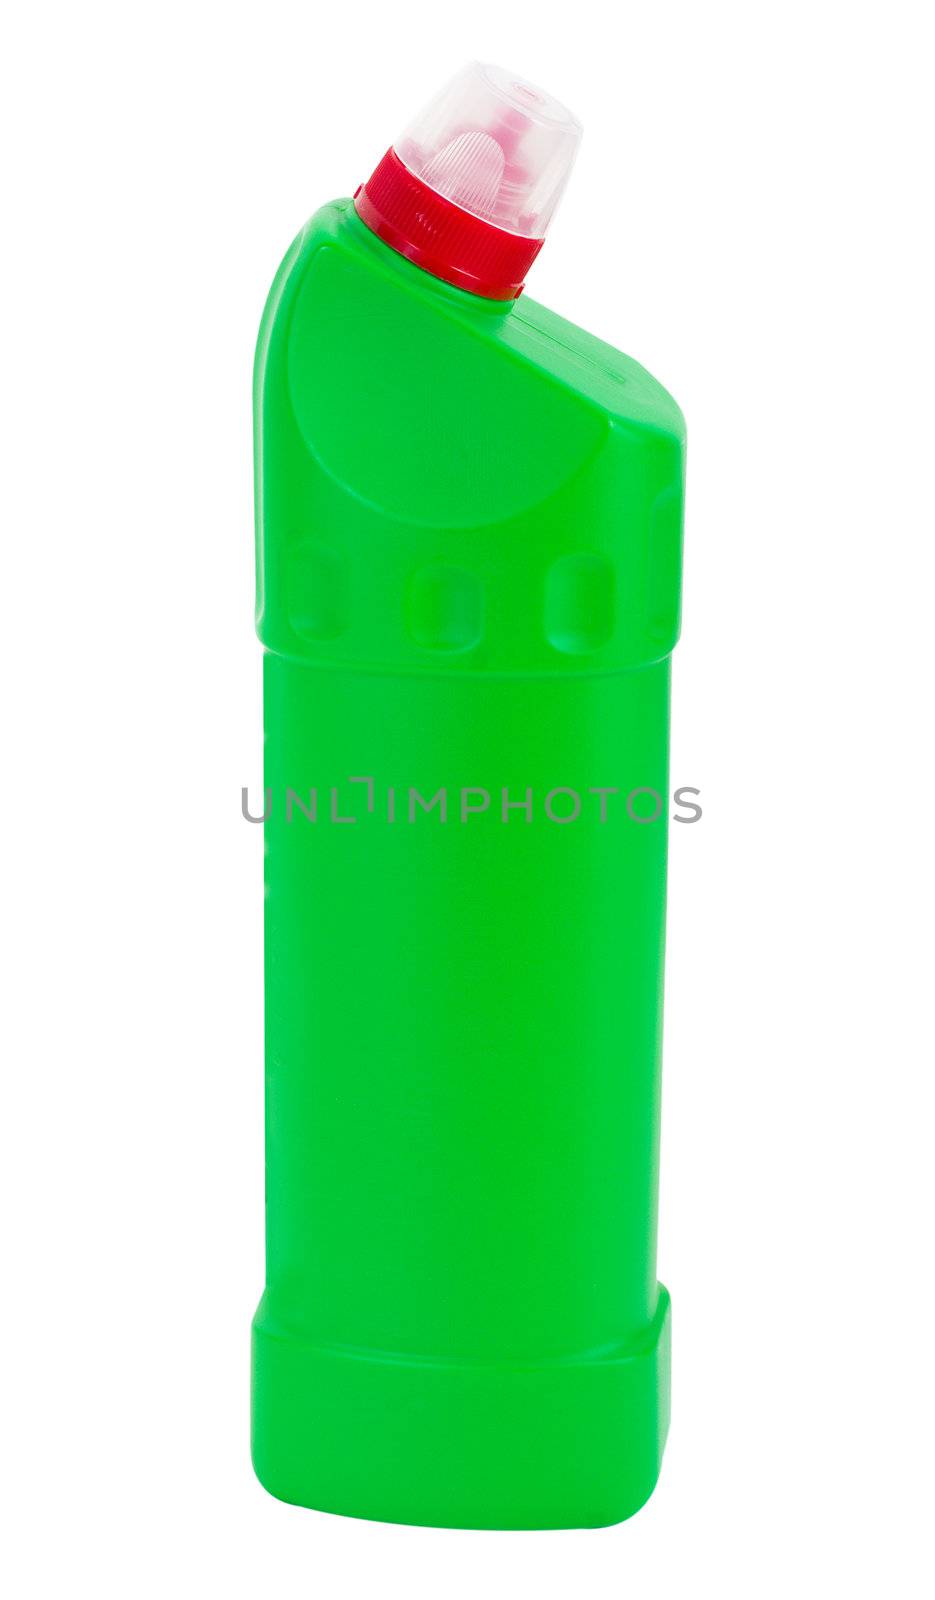 cleaning fluid, isolated on white